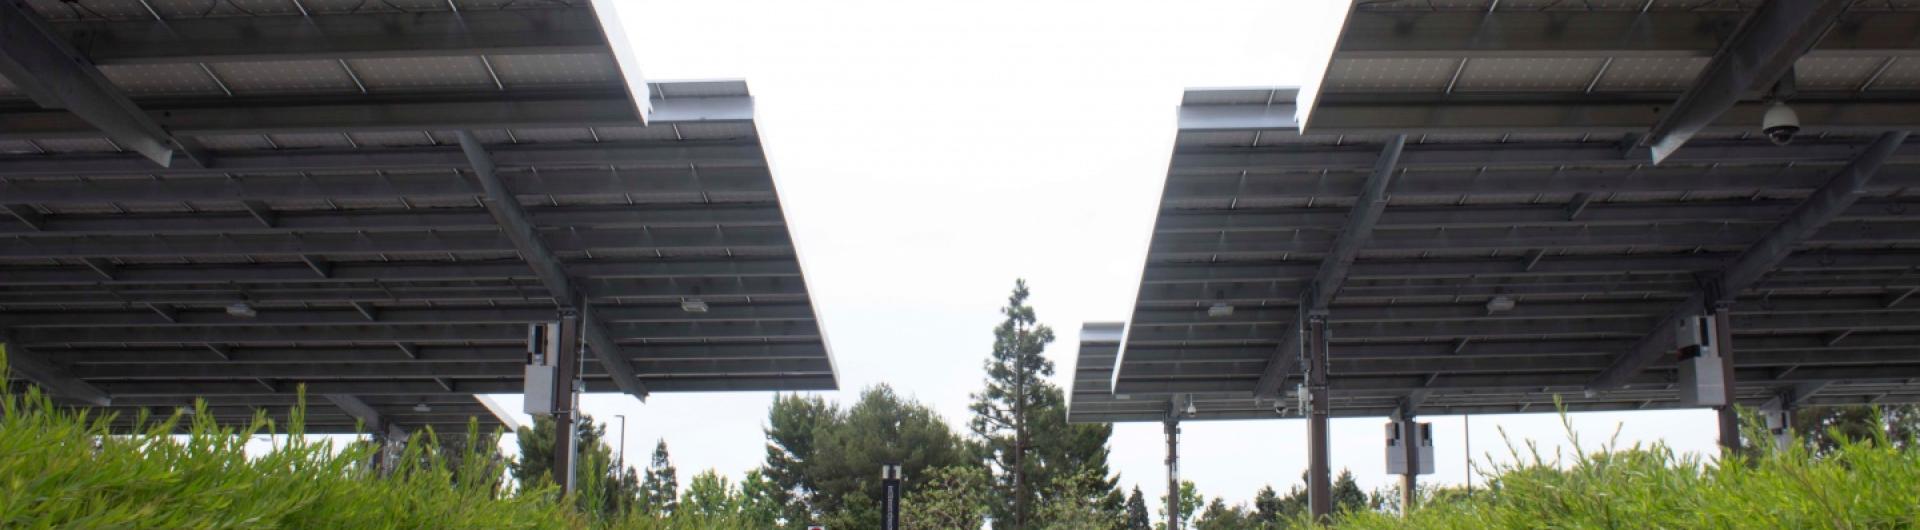 Image of solar panels in parking lot E8